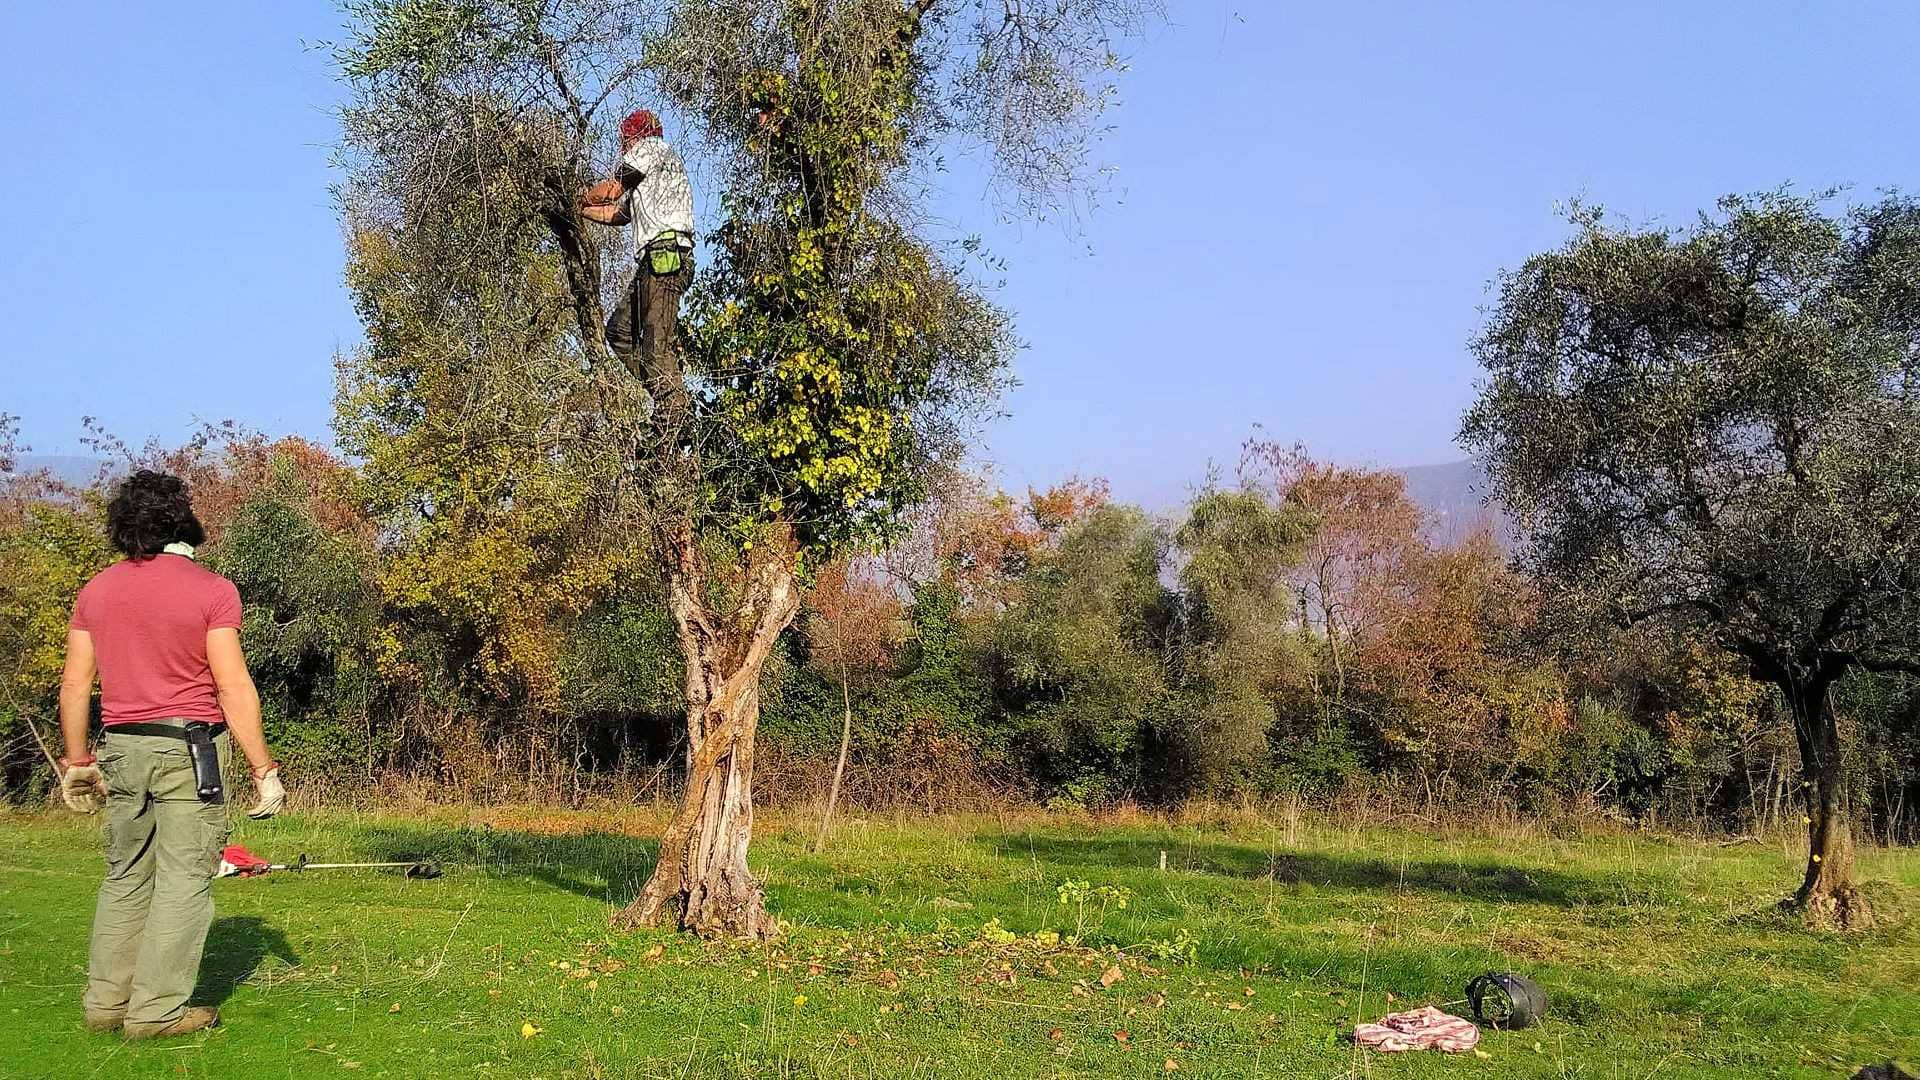 europe-world-production-business-on-shores-of-lake-garda-volunteers-harvest-abandoned-trees-for-charity-olive-oil-times